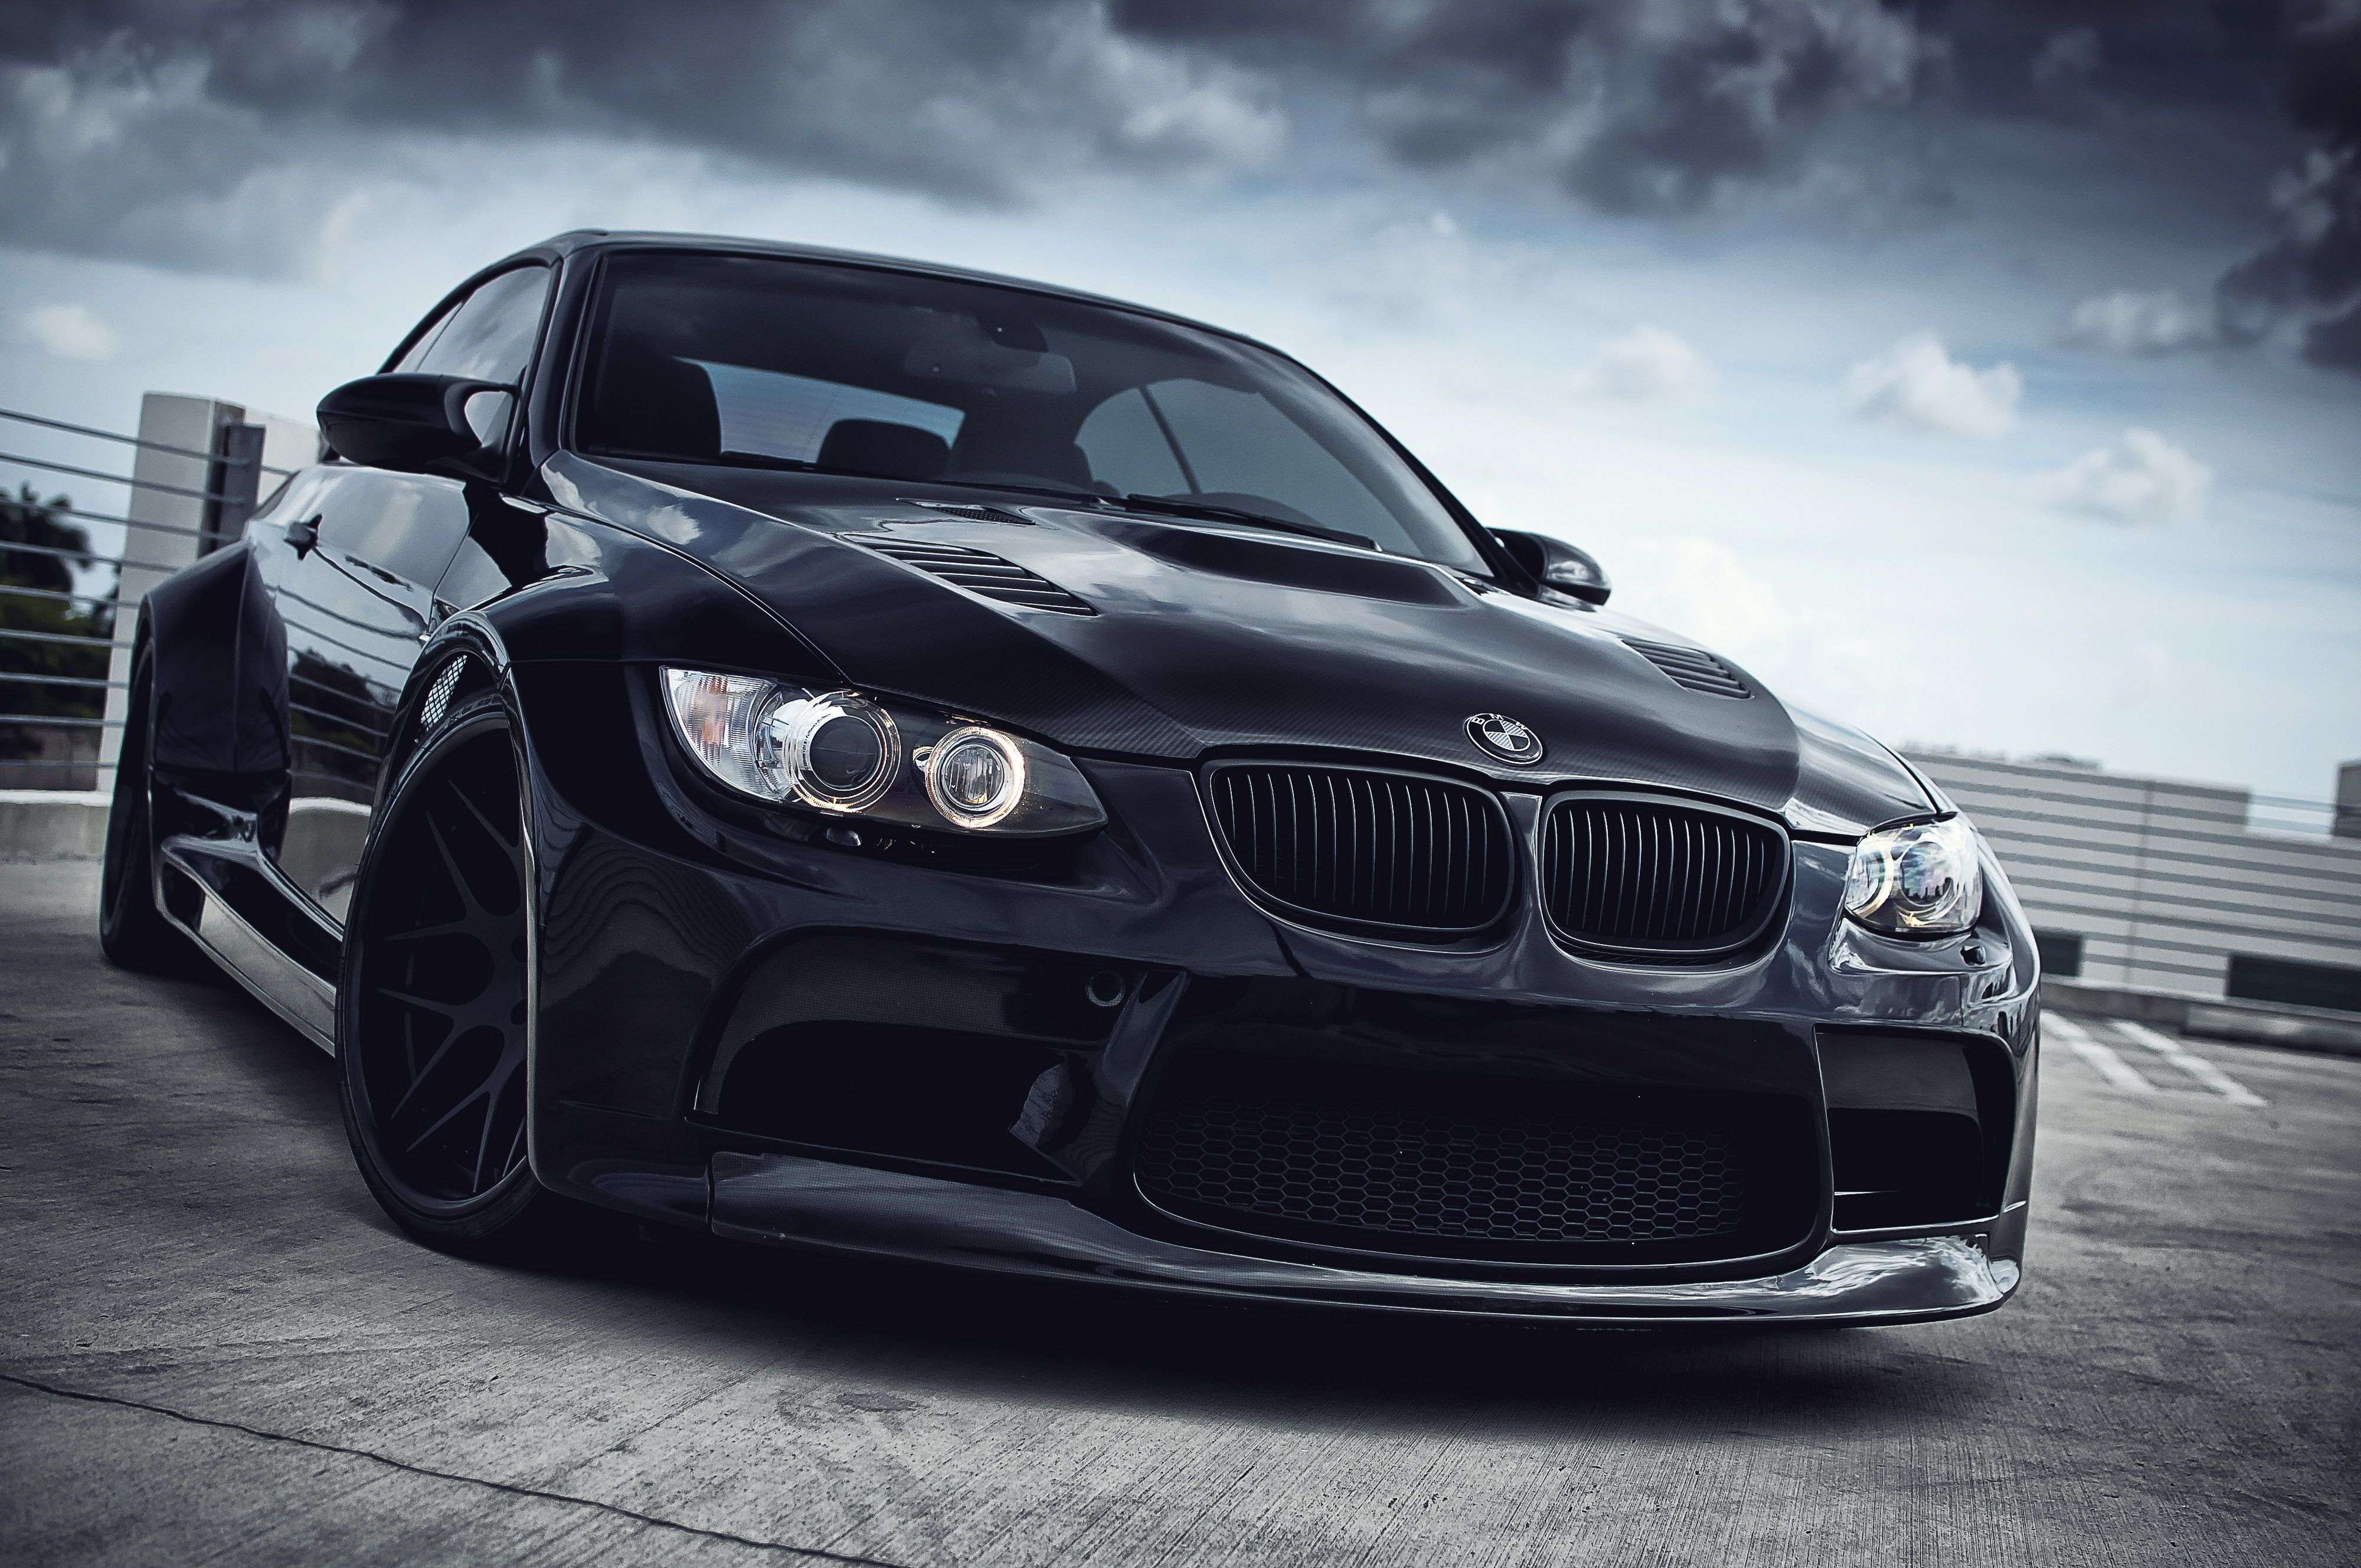 Black BMW M3 E92 on the roof. - BMW